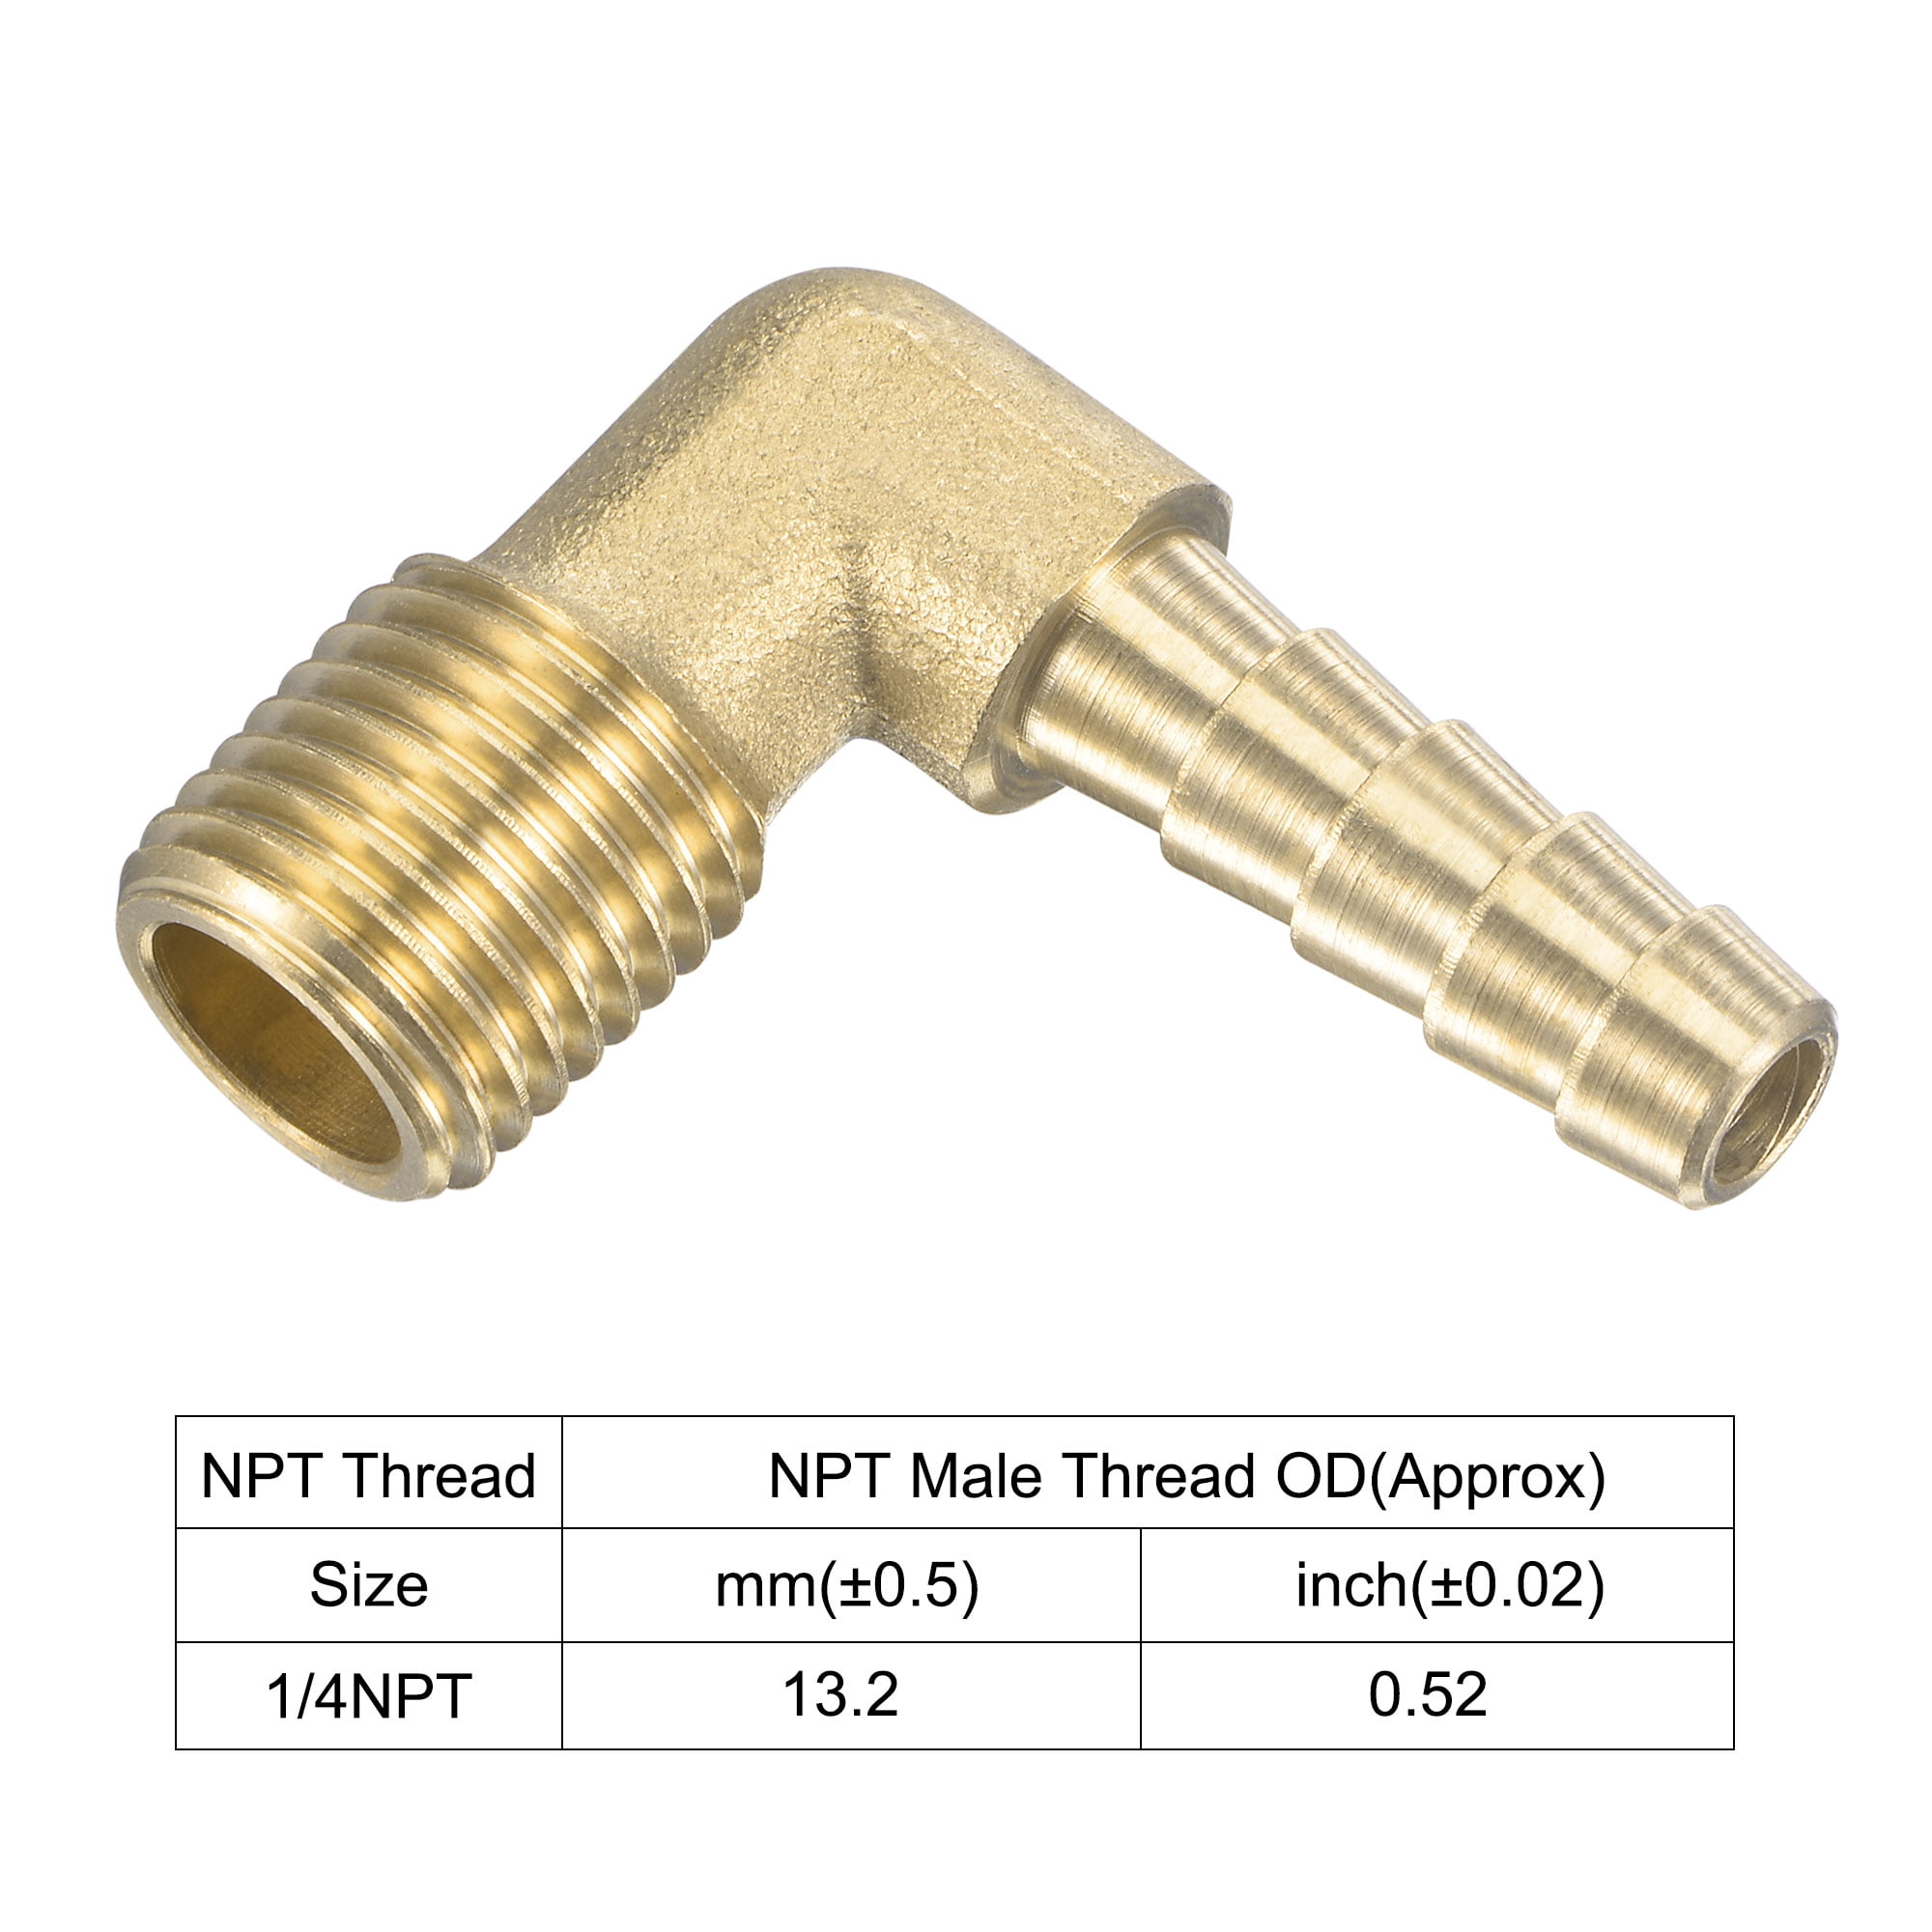 New 3/4" Male 90 Elbow Brass Hose Barbs Barb To 1/2" NPT Pipe Male Thread 